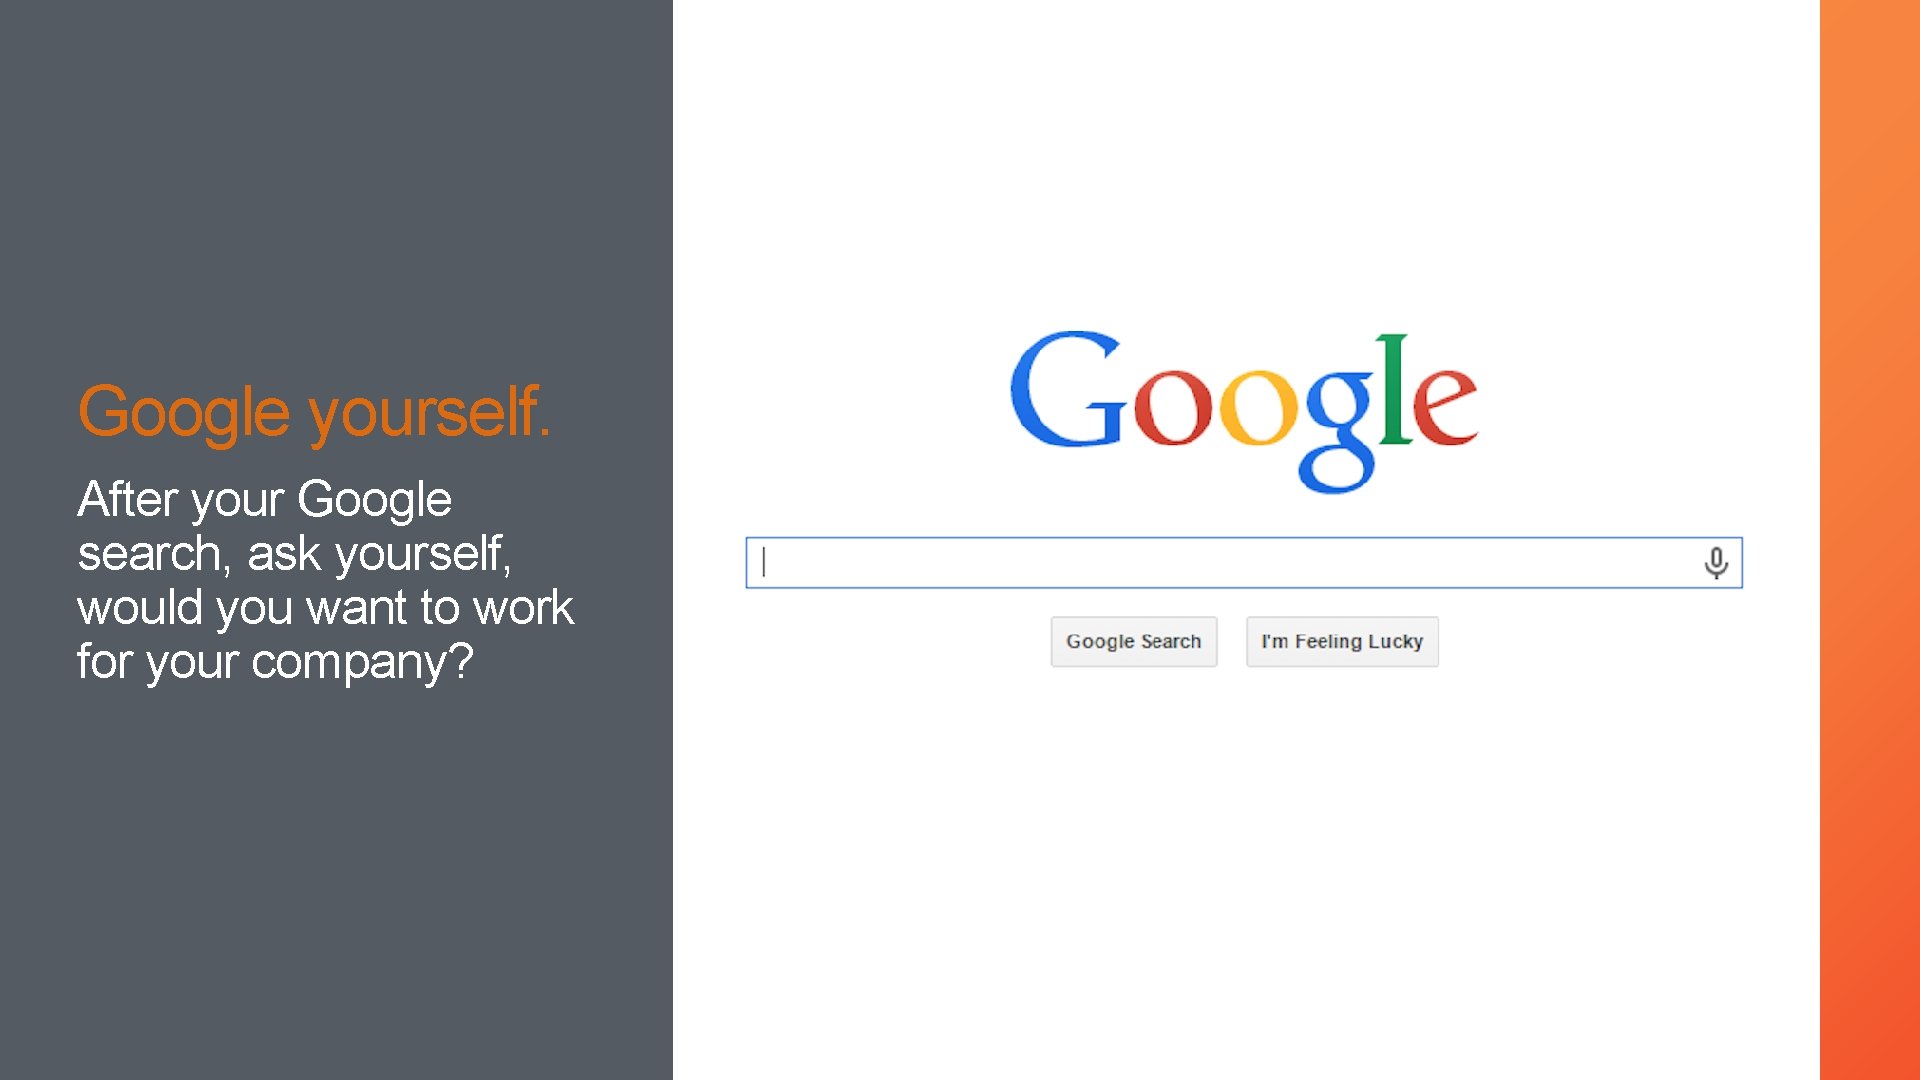 Google yourself. After your Google search, ask yourself, would you want to work for